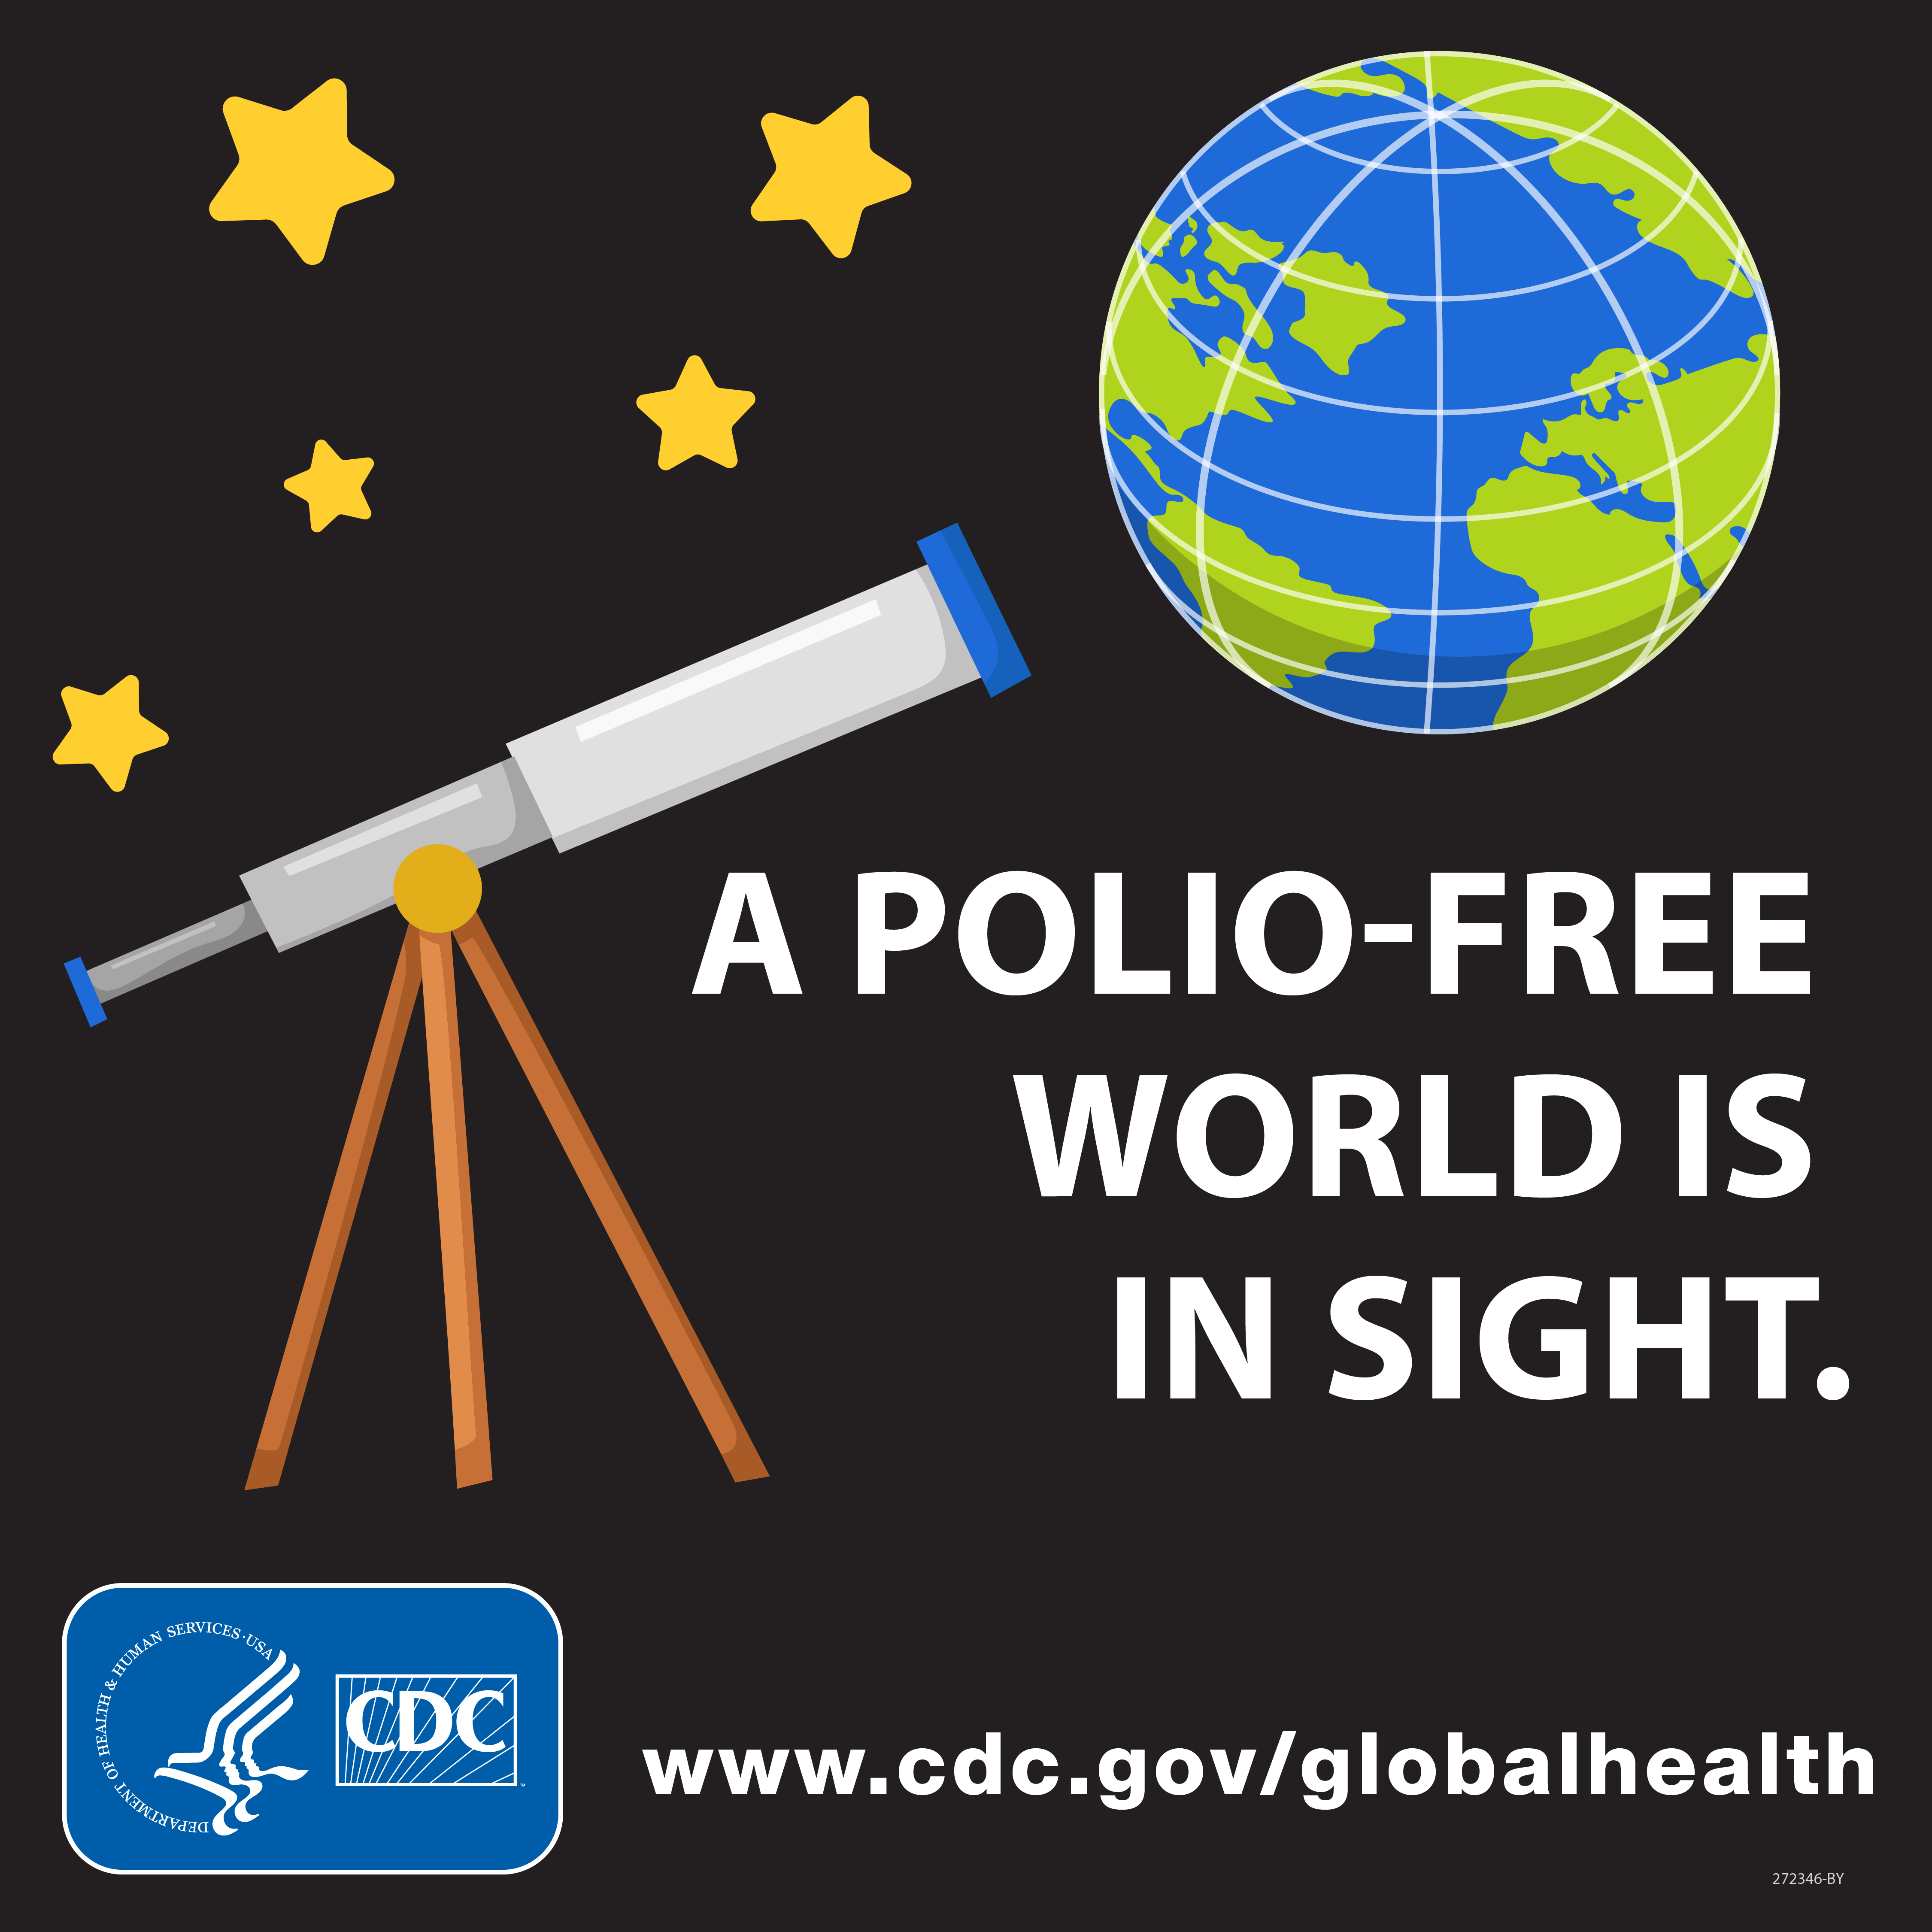 A polio-free world is in sight